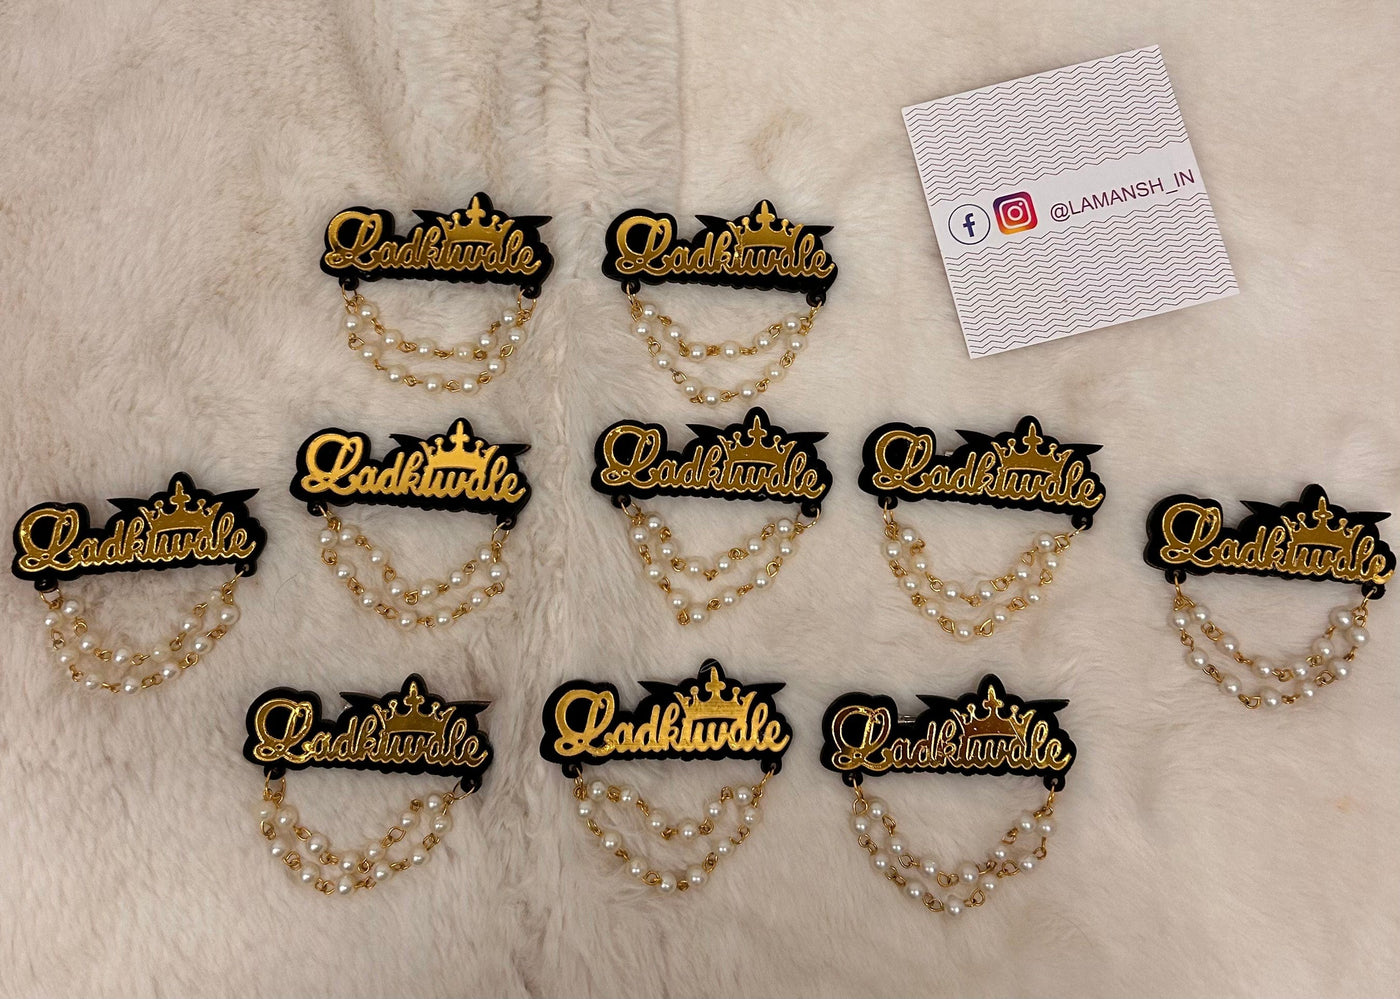 30 Rs per pc ON BUYING 🏷IN BULK Broaches LAMANSH® Ladkiwale Brooches for Barati swagat in wedding / Quirky Brooches for Guests in Shaadi🎉